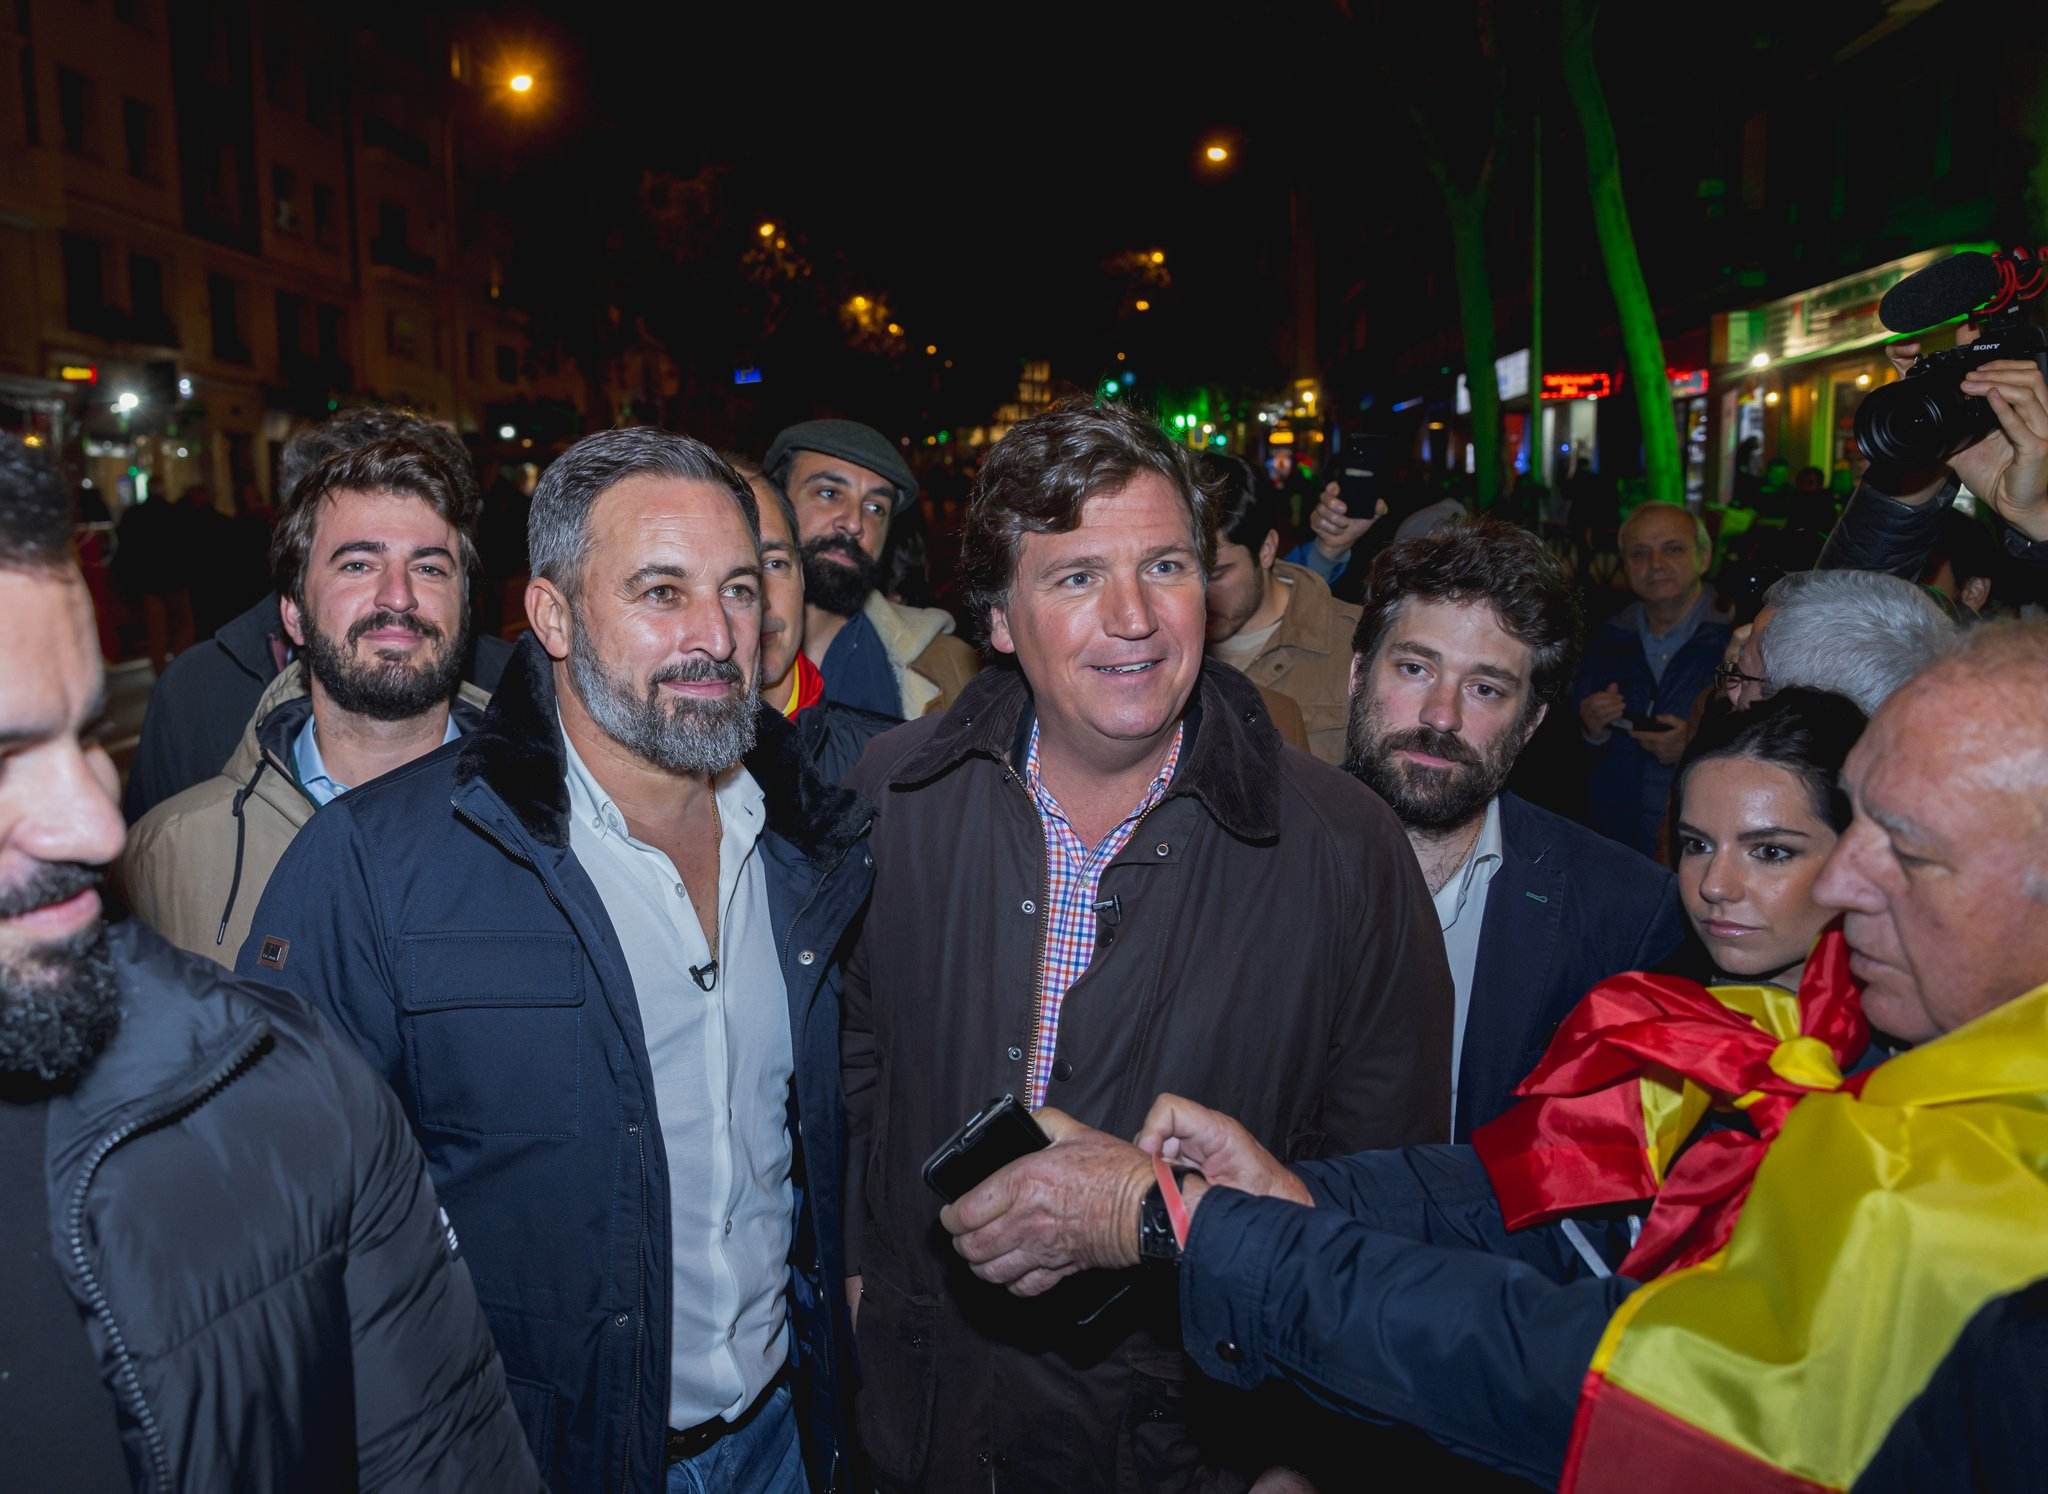 Who is Tucker Carlson and what might his close ties to Spain's Vox mean?